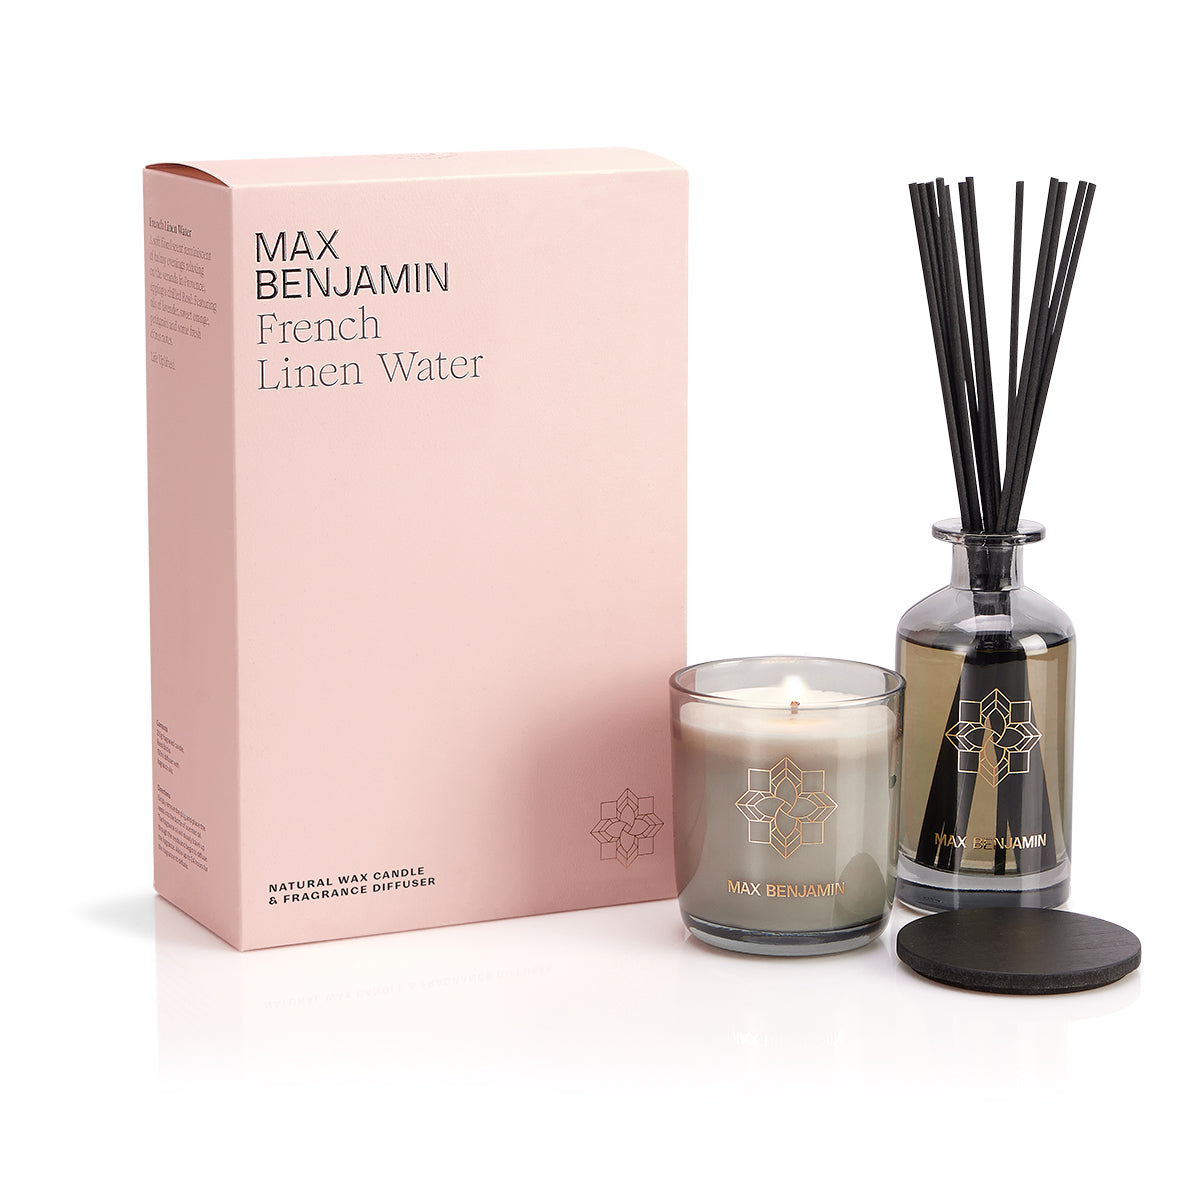 Max Benjamin Candle & Diffuser Gift Set - French Linen Water